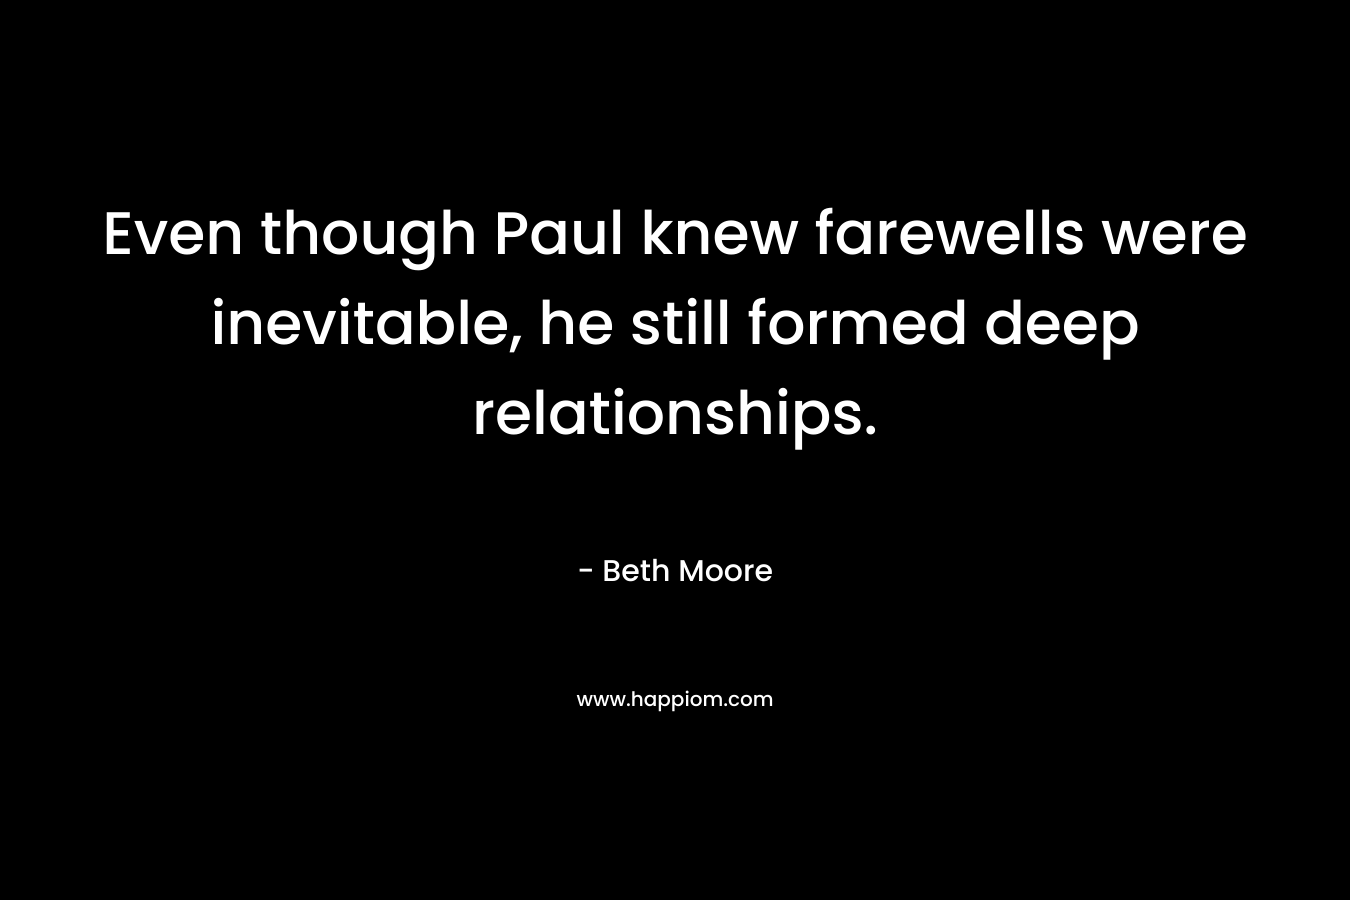 Even though Paul knew farewells were inevitable, he still formed deep relationships.